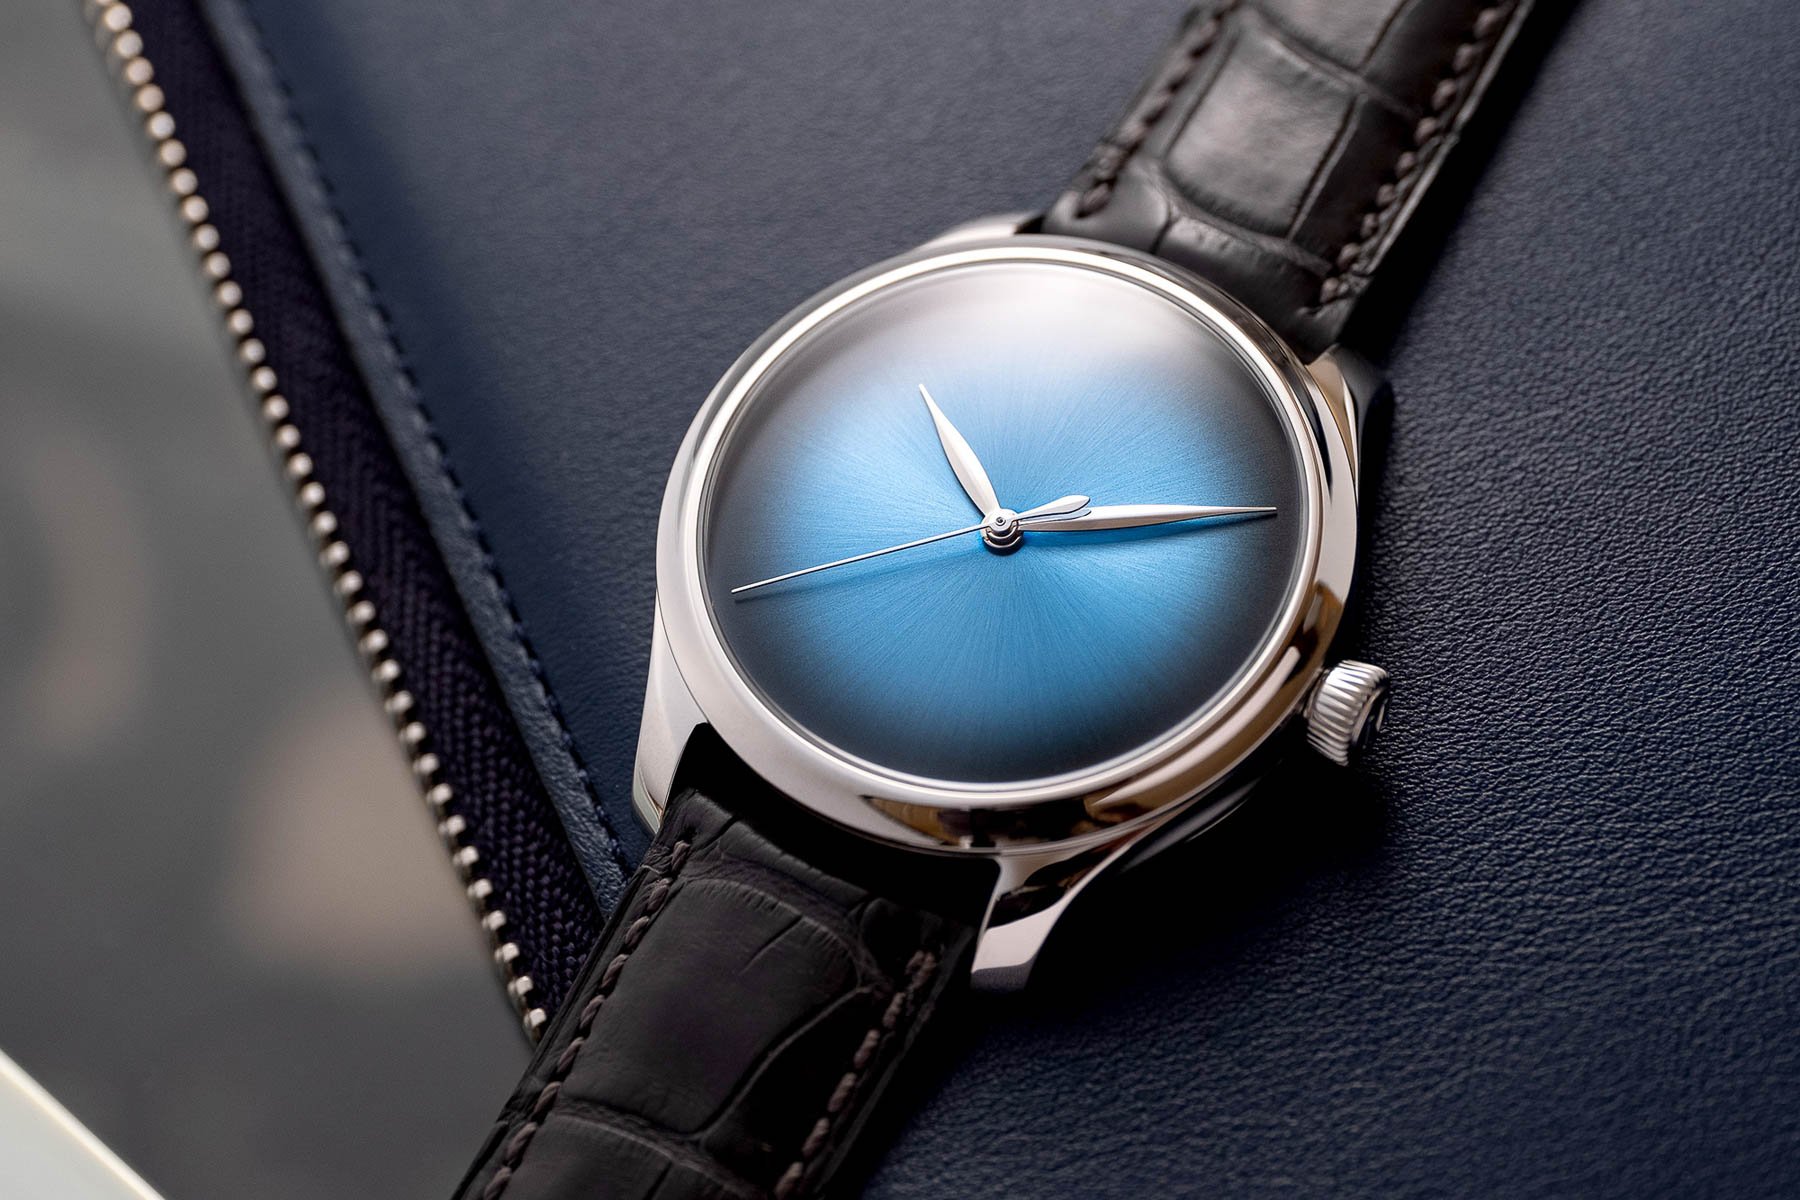 This Week in Watches: March 21, 2020